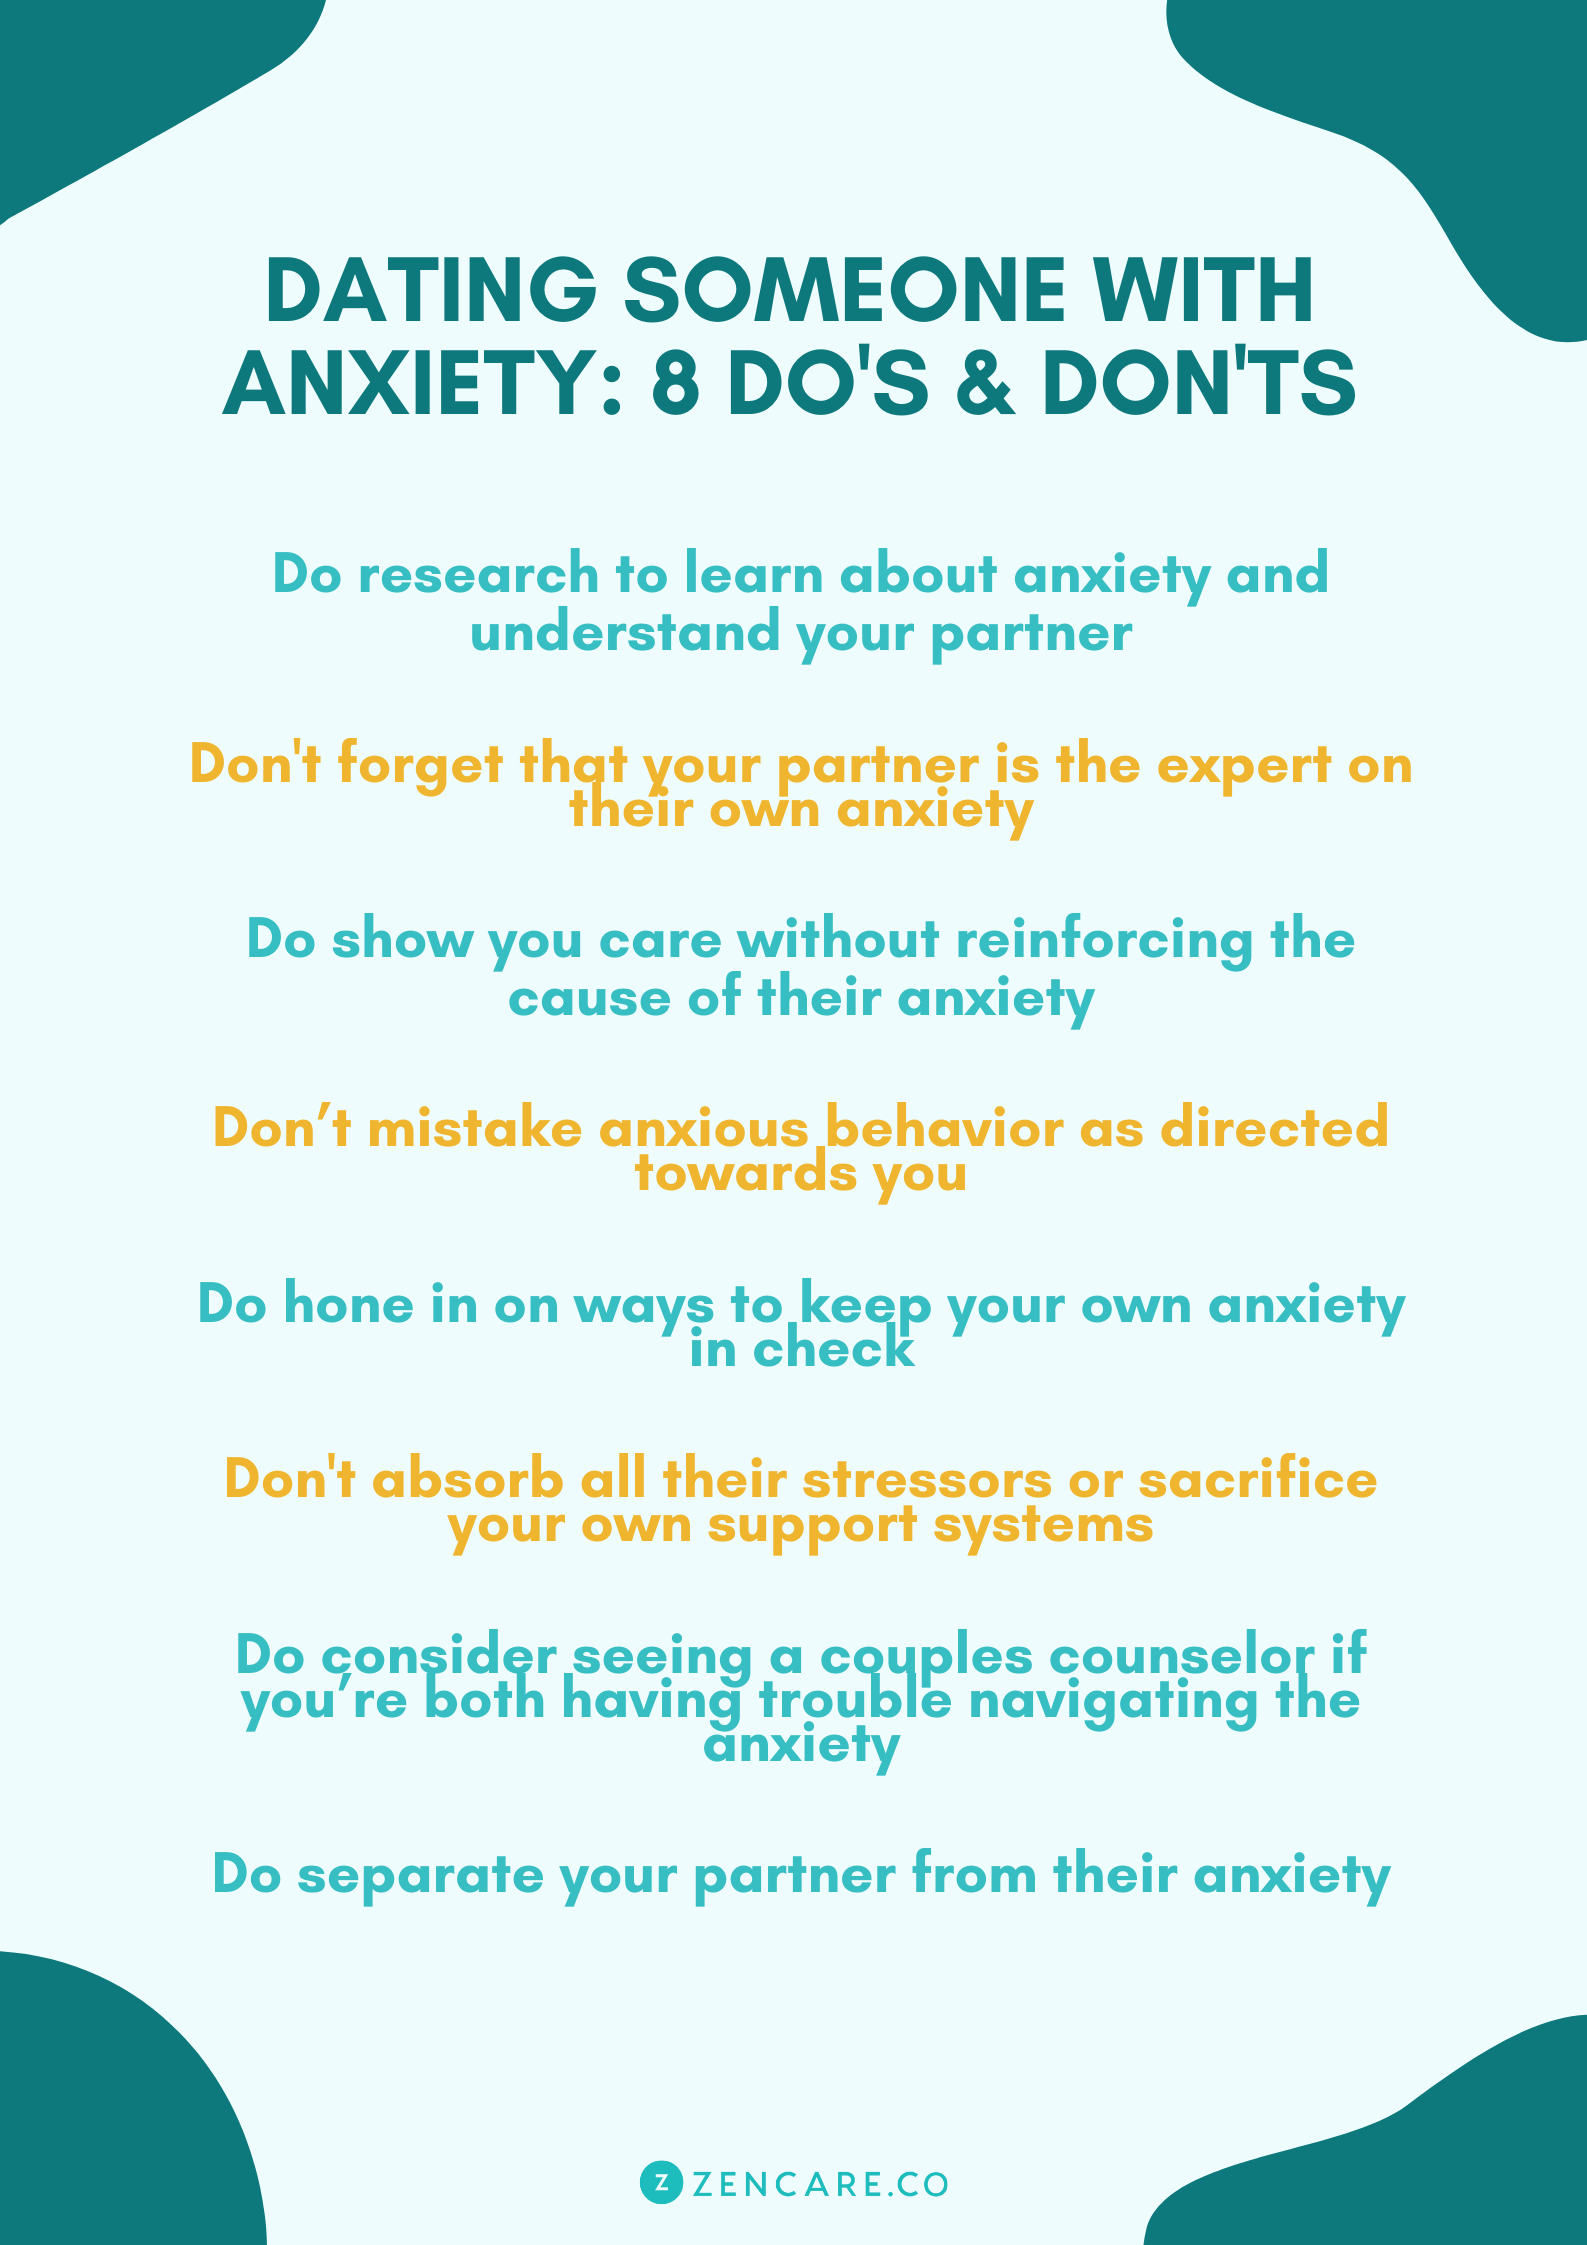 10 things to know when dating someone with anxiety